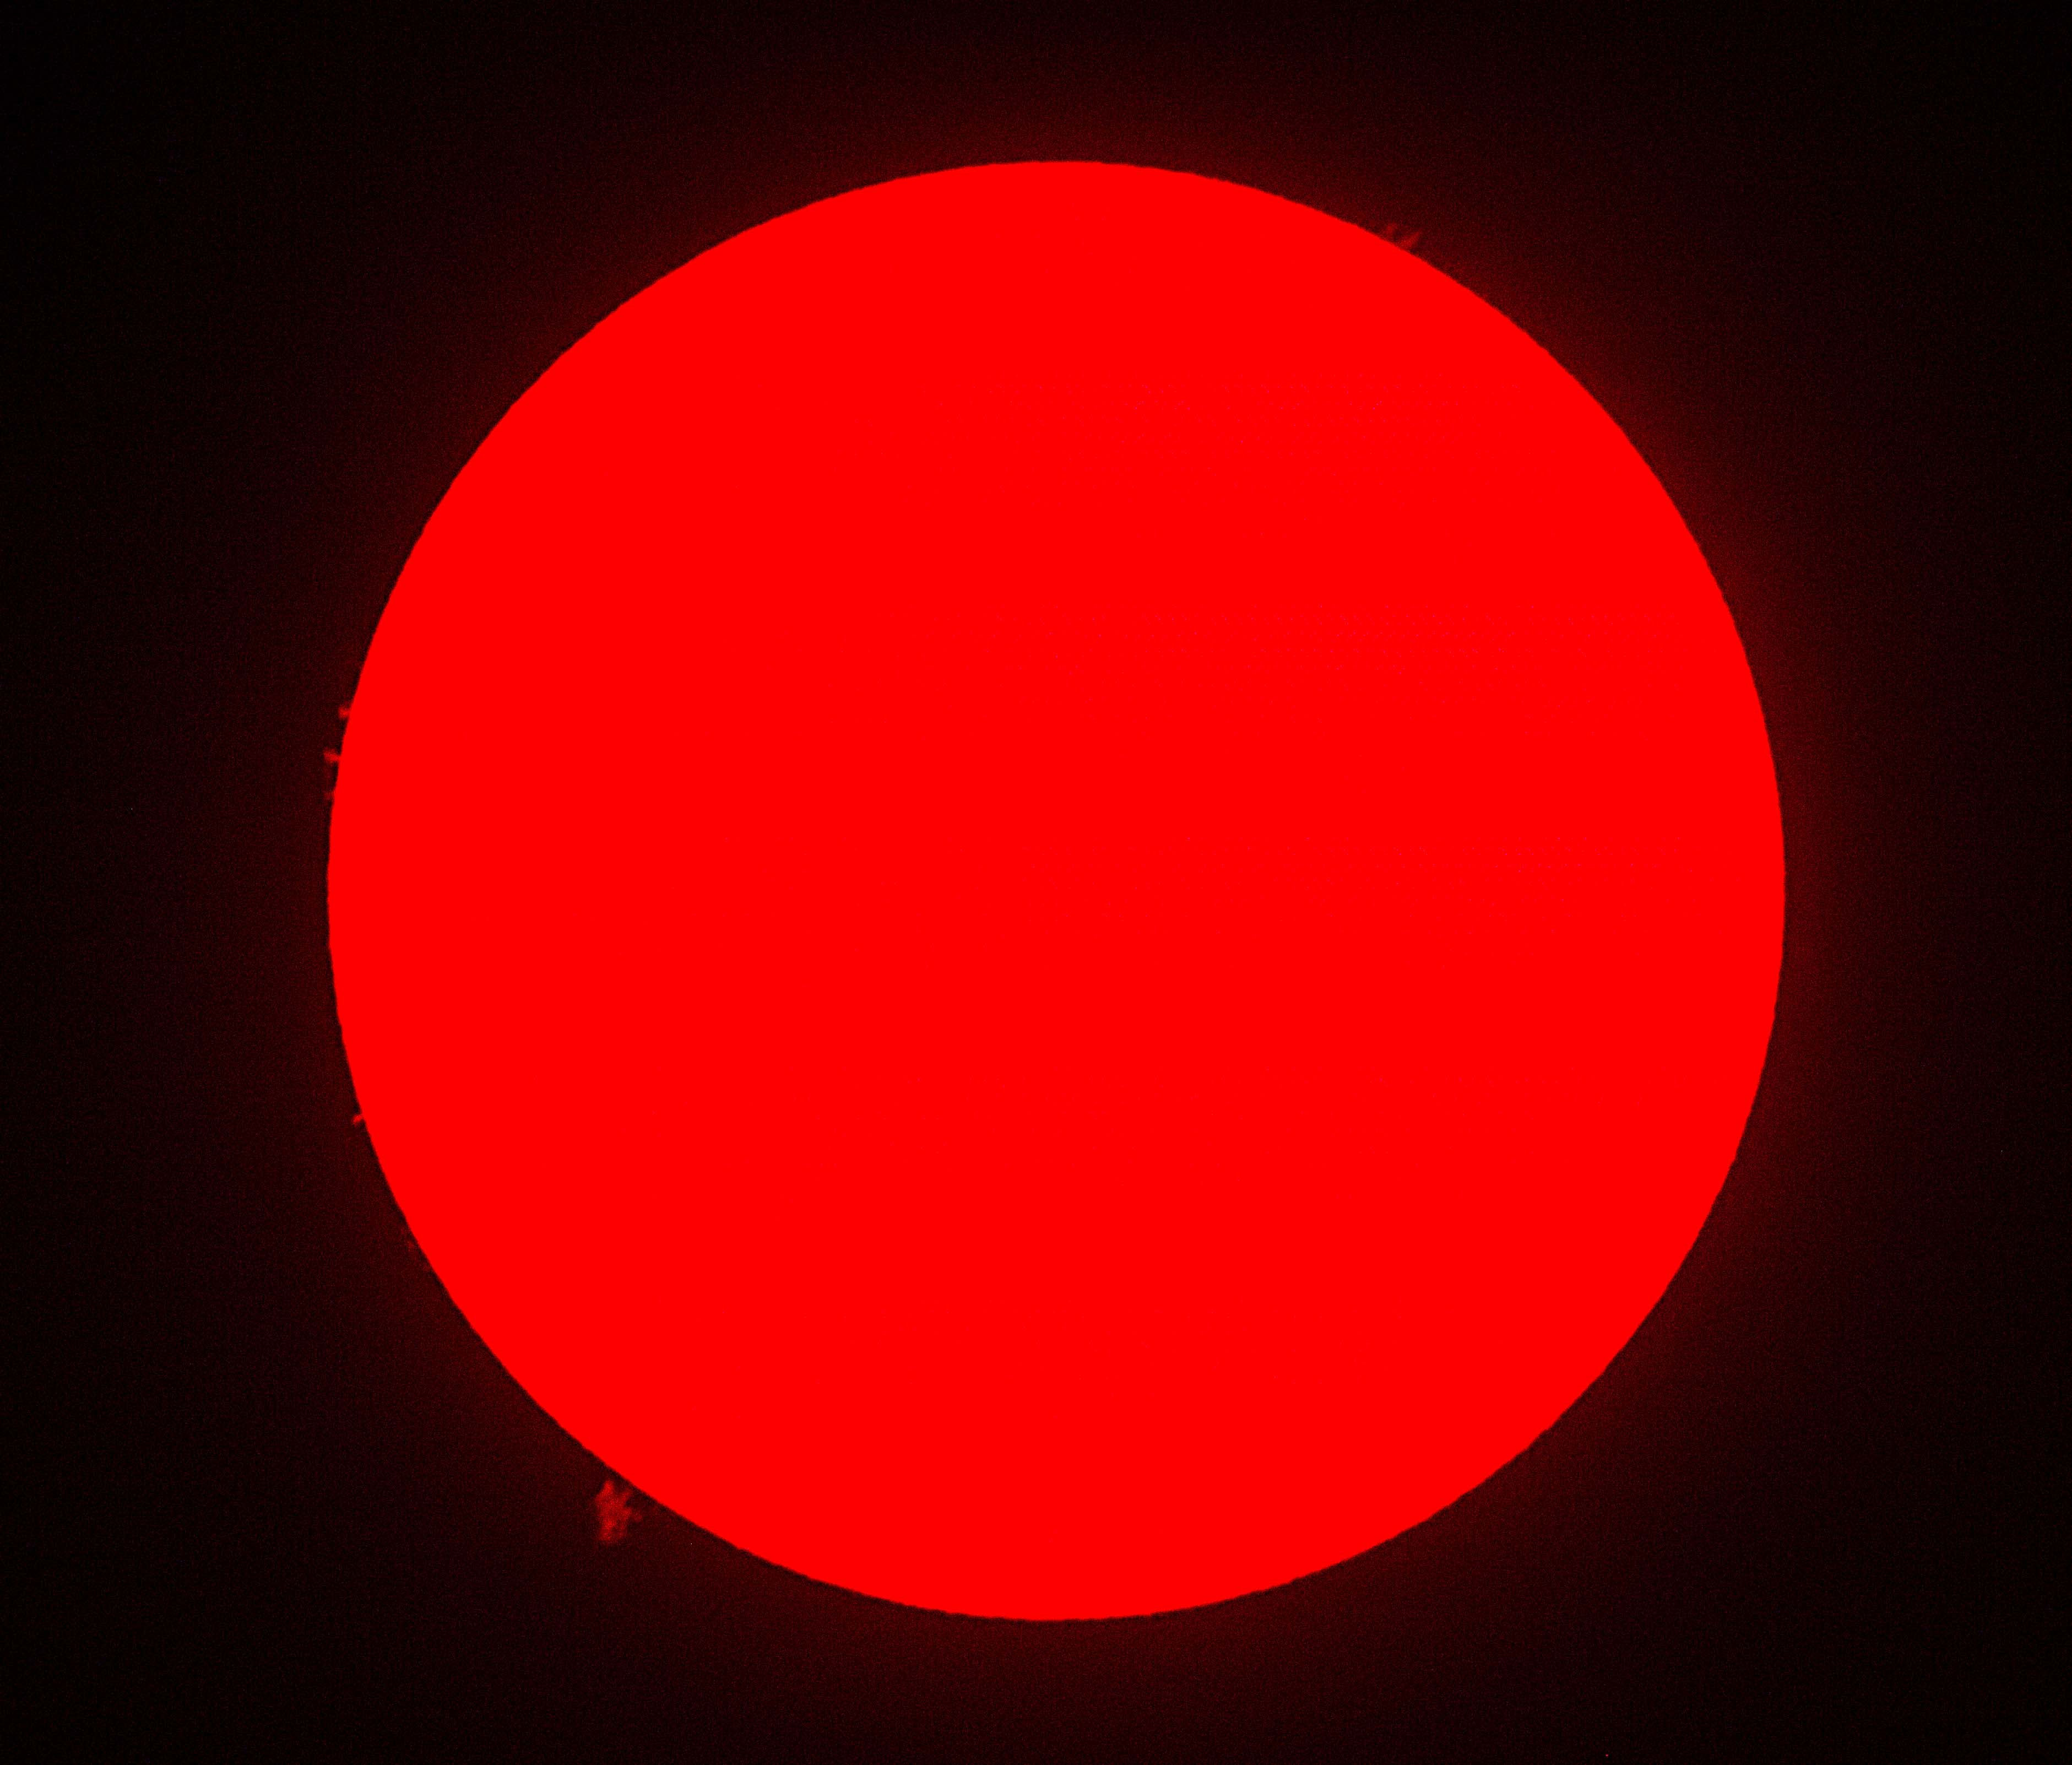 Sol 2 by Ken Kennedy 18.06.17  11.52. Canon EOS 100D, 1/10 second.  ISO-100. This is the second of two images taken by Ken  through the Society's 50mm Coronado telescope this time showing prominenceces